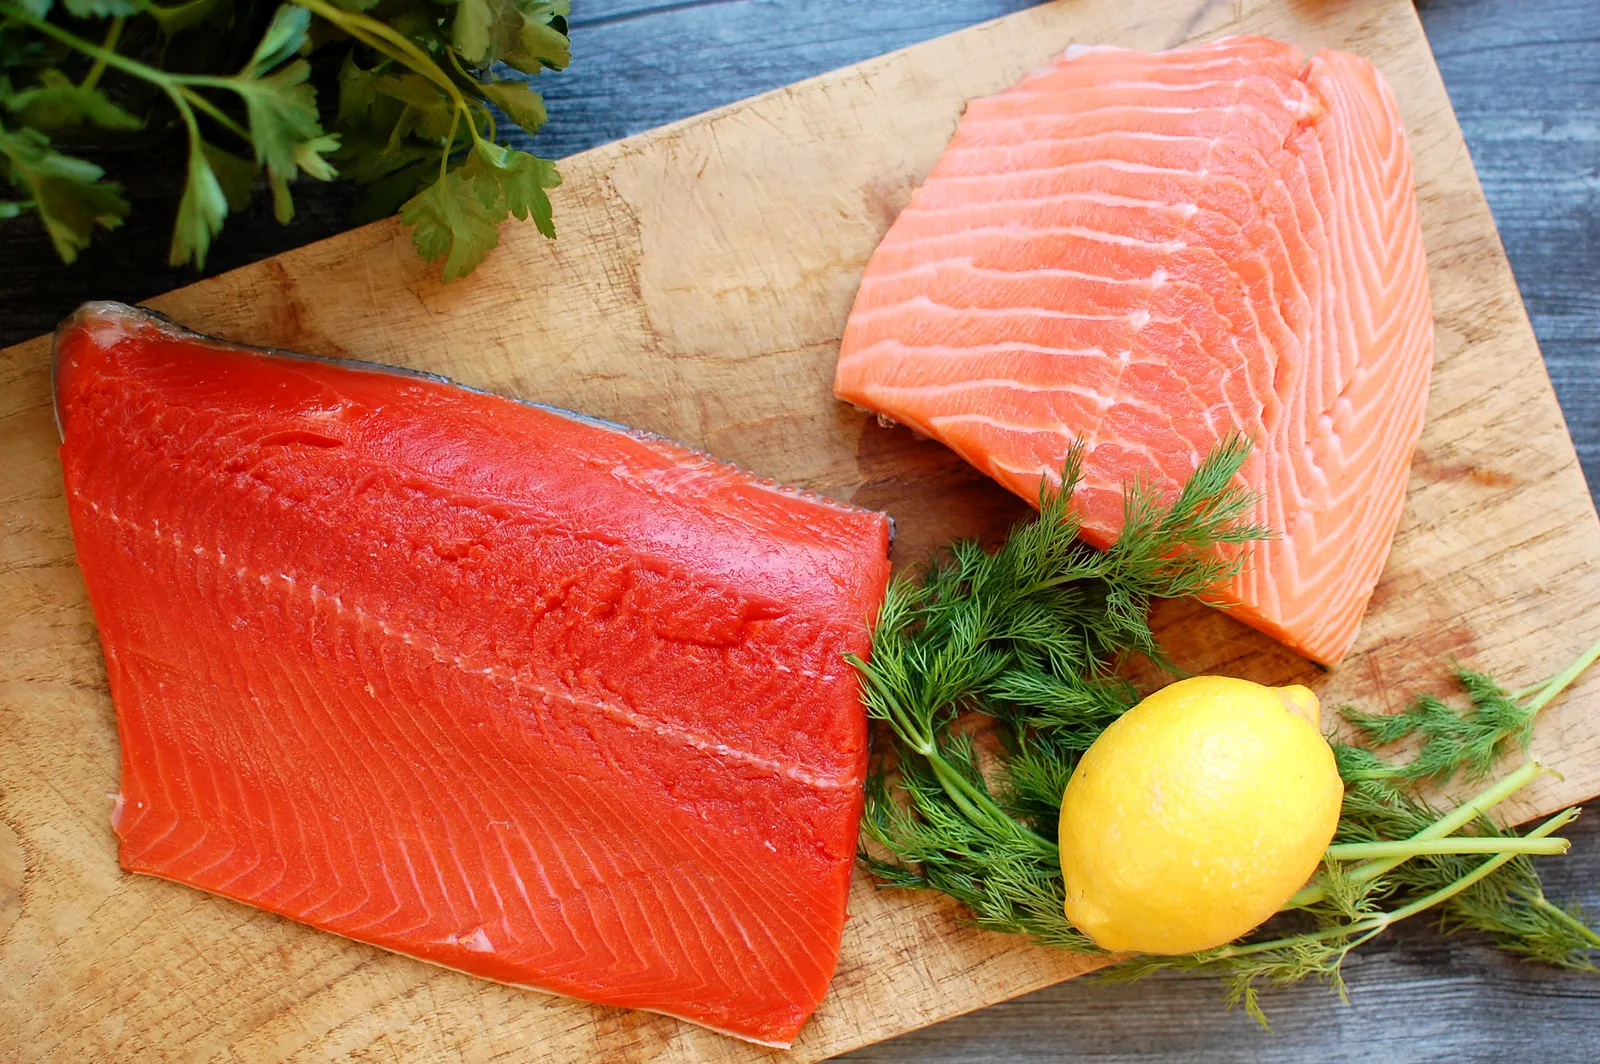 Which is Better: Wild Salmon or Farmed Salmon?